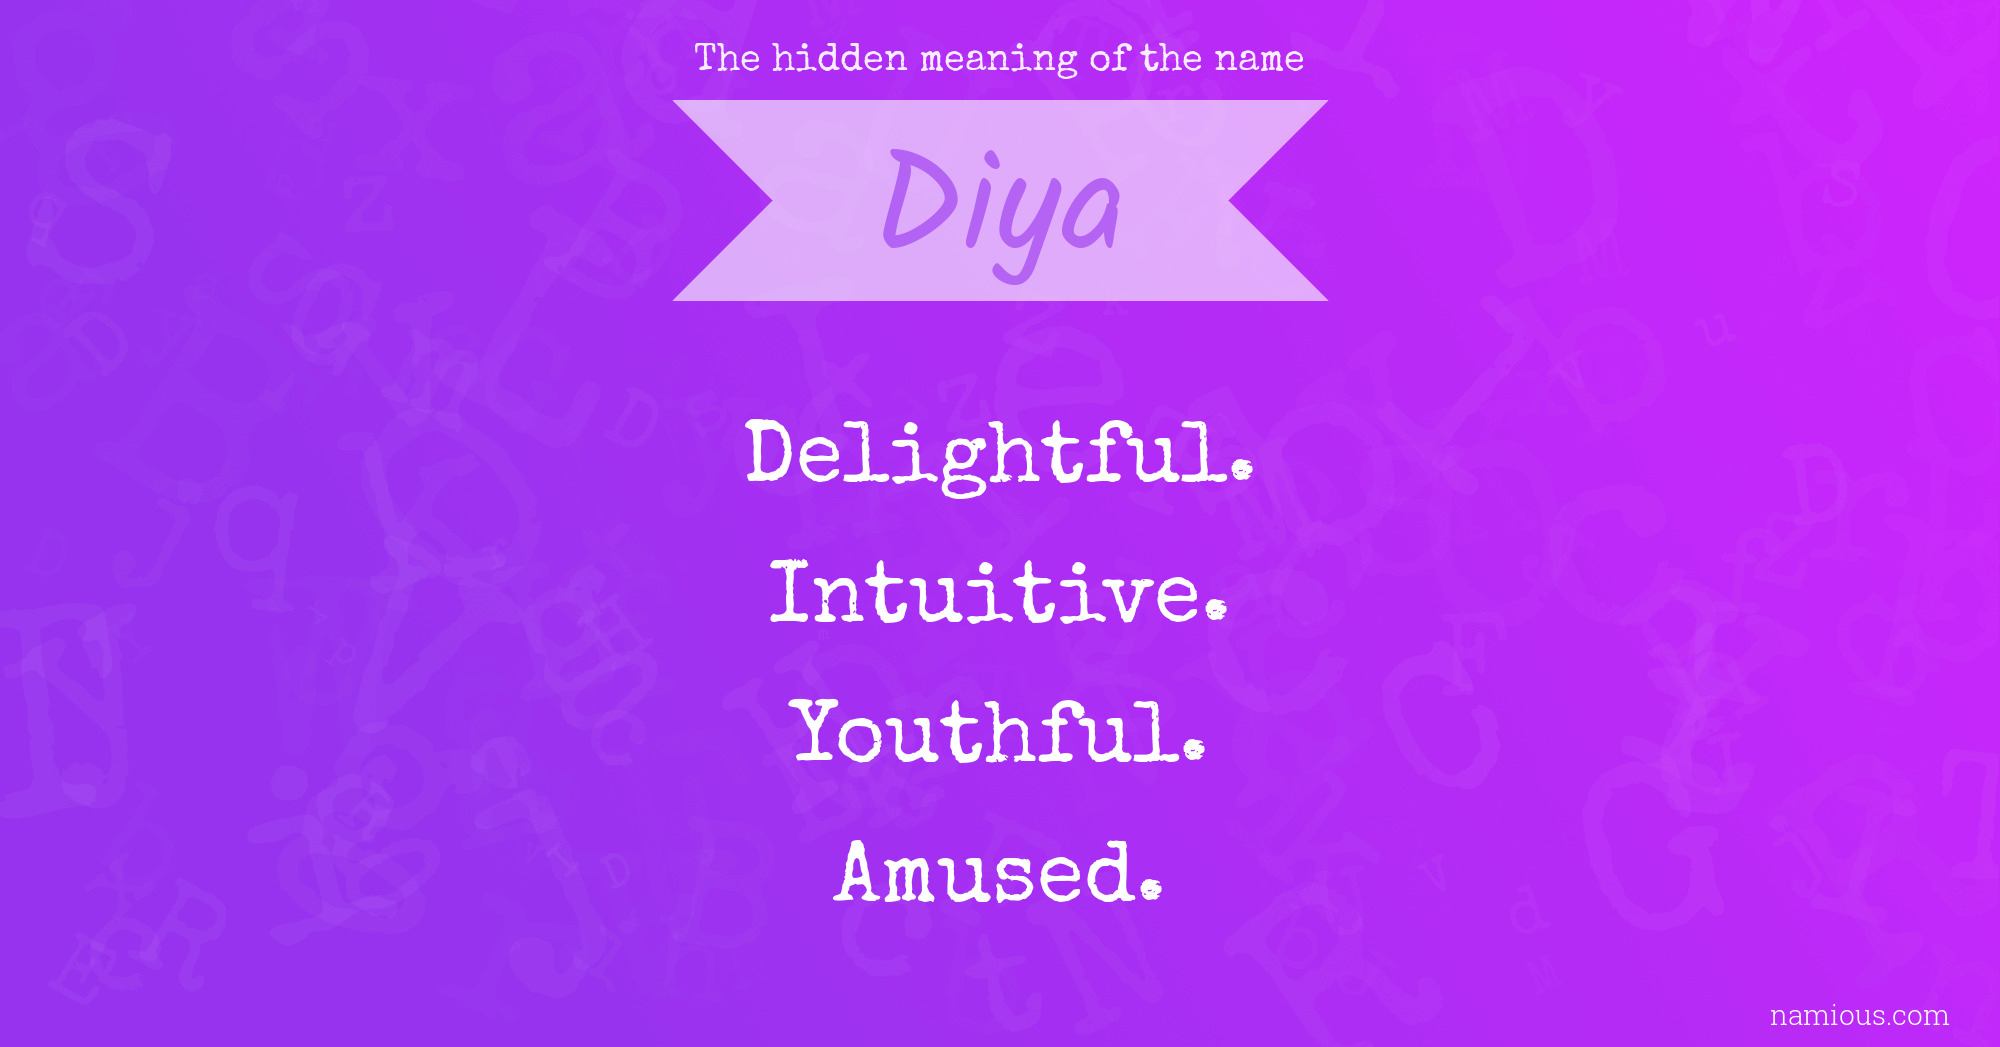 The hidden meaning of the name Diya